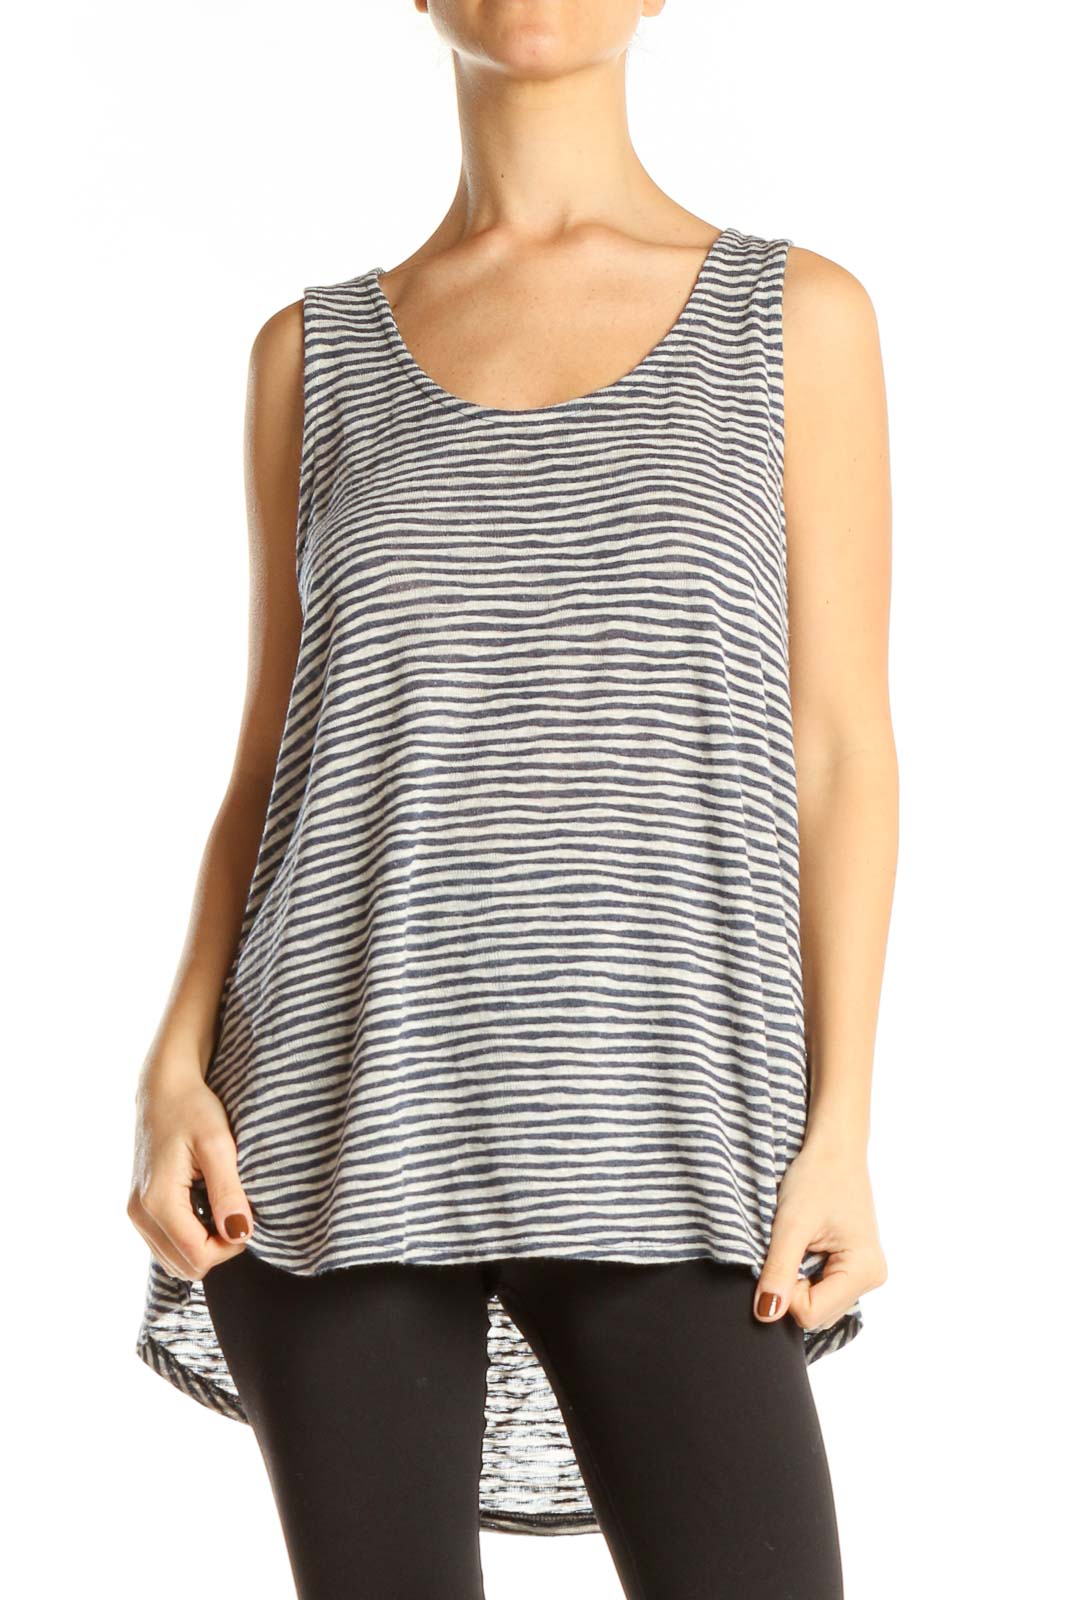 Gray Striped Top Front